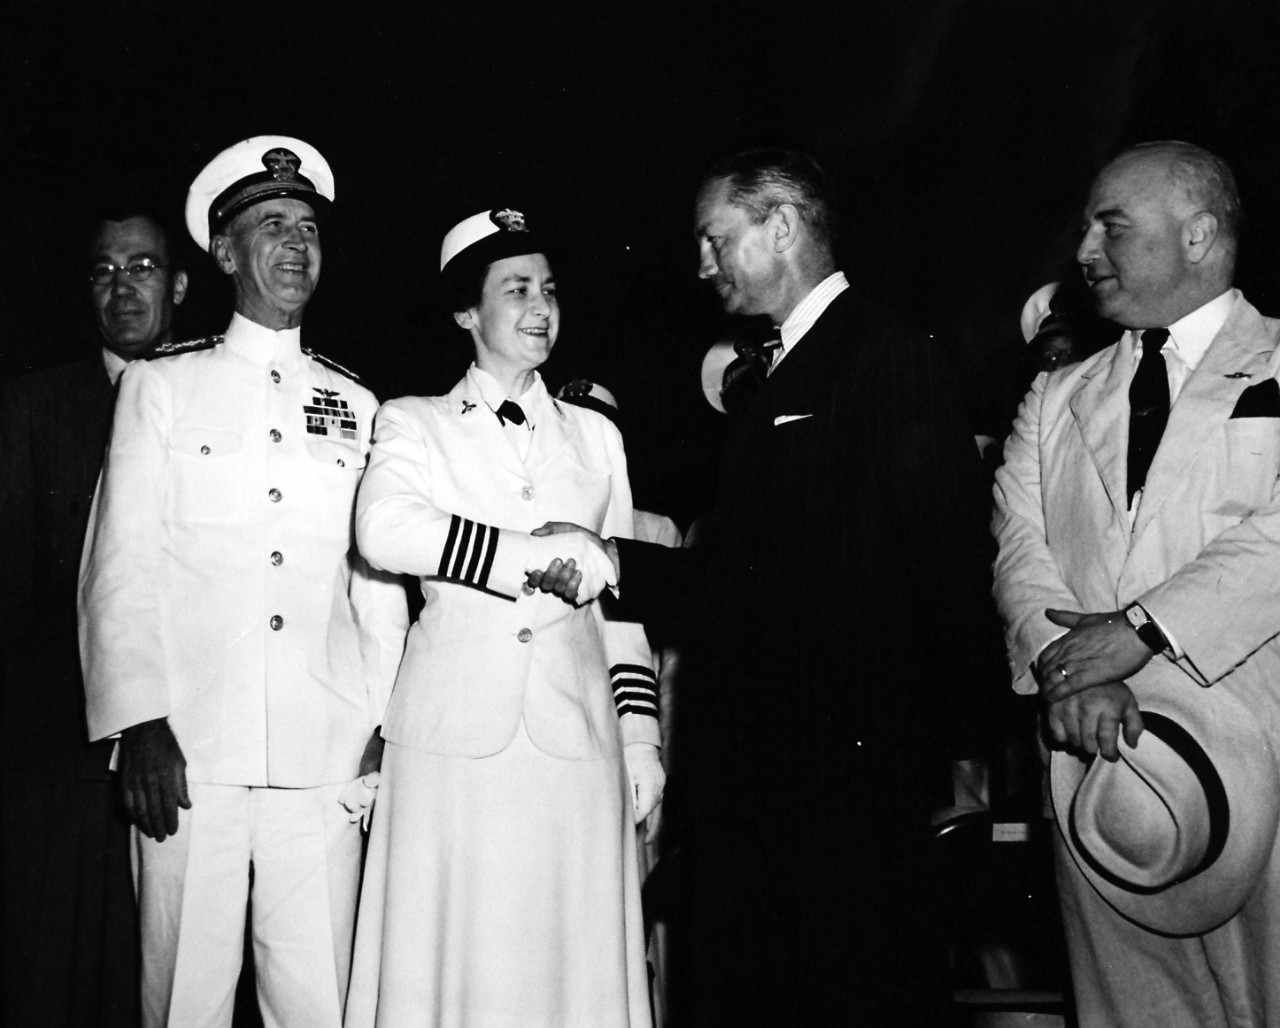 80-G-46253:  WAVES in Washington, D.C. July 1944.   WAVES hold rally at Washington Monument Grounds to celebrate the second anniversary of the establishment of the Women’s Reserve of the U.S. Navy.  Secretary of the Navy James Forrestal congratulates the Women’s Reserve on two years of service as he shakes hands with Captain Mildred H. McAfee, USNR; Assistant Secretary of the Navy for Air Artemus L. Gates, Admiral Ernest J. King, USN, and Representative Melvan J. Mass, smiling look on.   Released July 31, 1944.  Official U.S. Navy Photograph, now in the collections of the National Archives.  